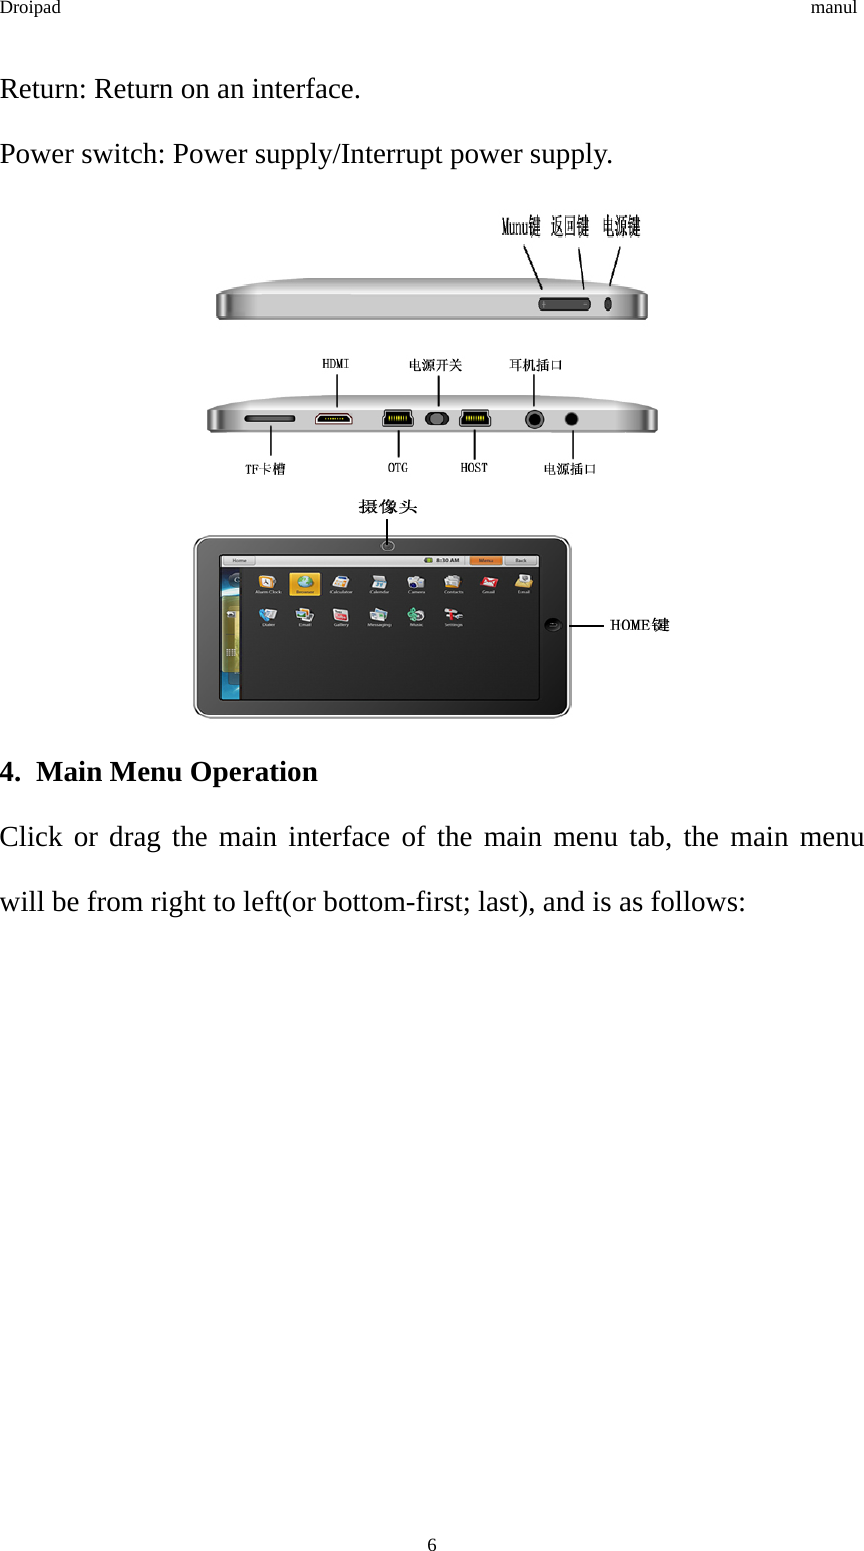 Droipad                                                                                manul Return: Return on an interface. Power switch: Power supply/Interrupt power supply.    4.  Main Menu Operation Click or drag the main interface of the main menu tab, the main menu will be from right to left(or bottom-first; last), and is as follows:  6